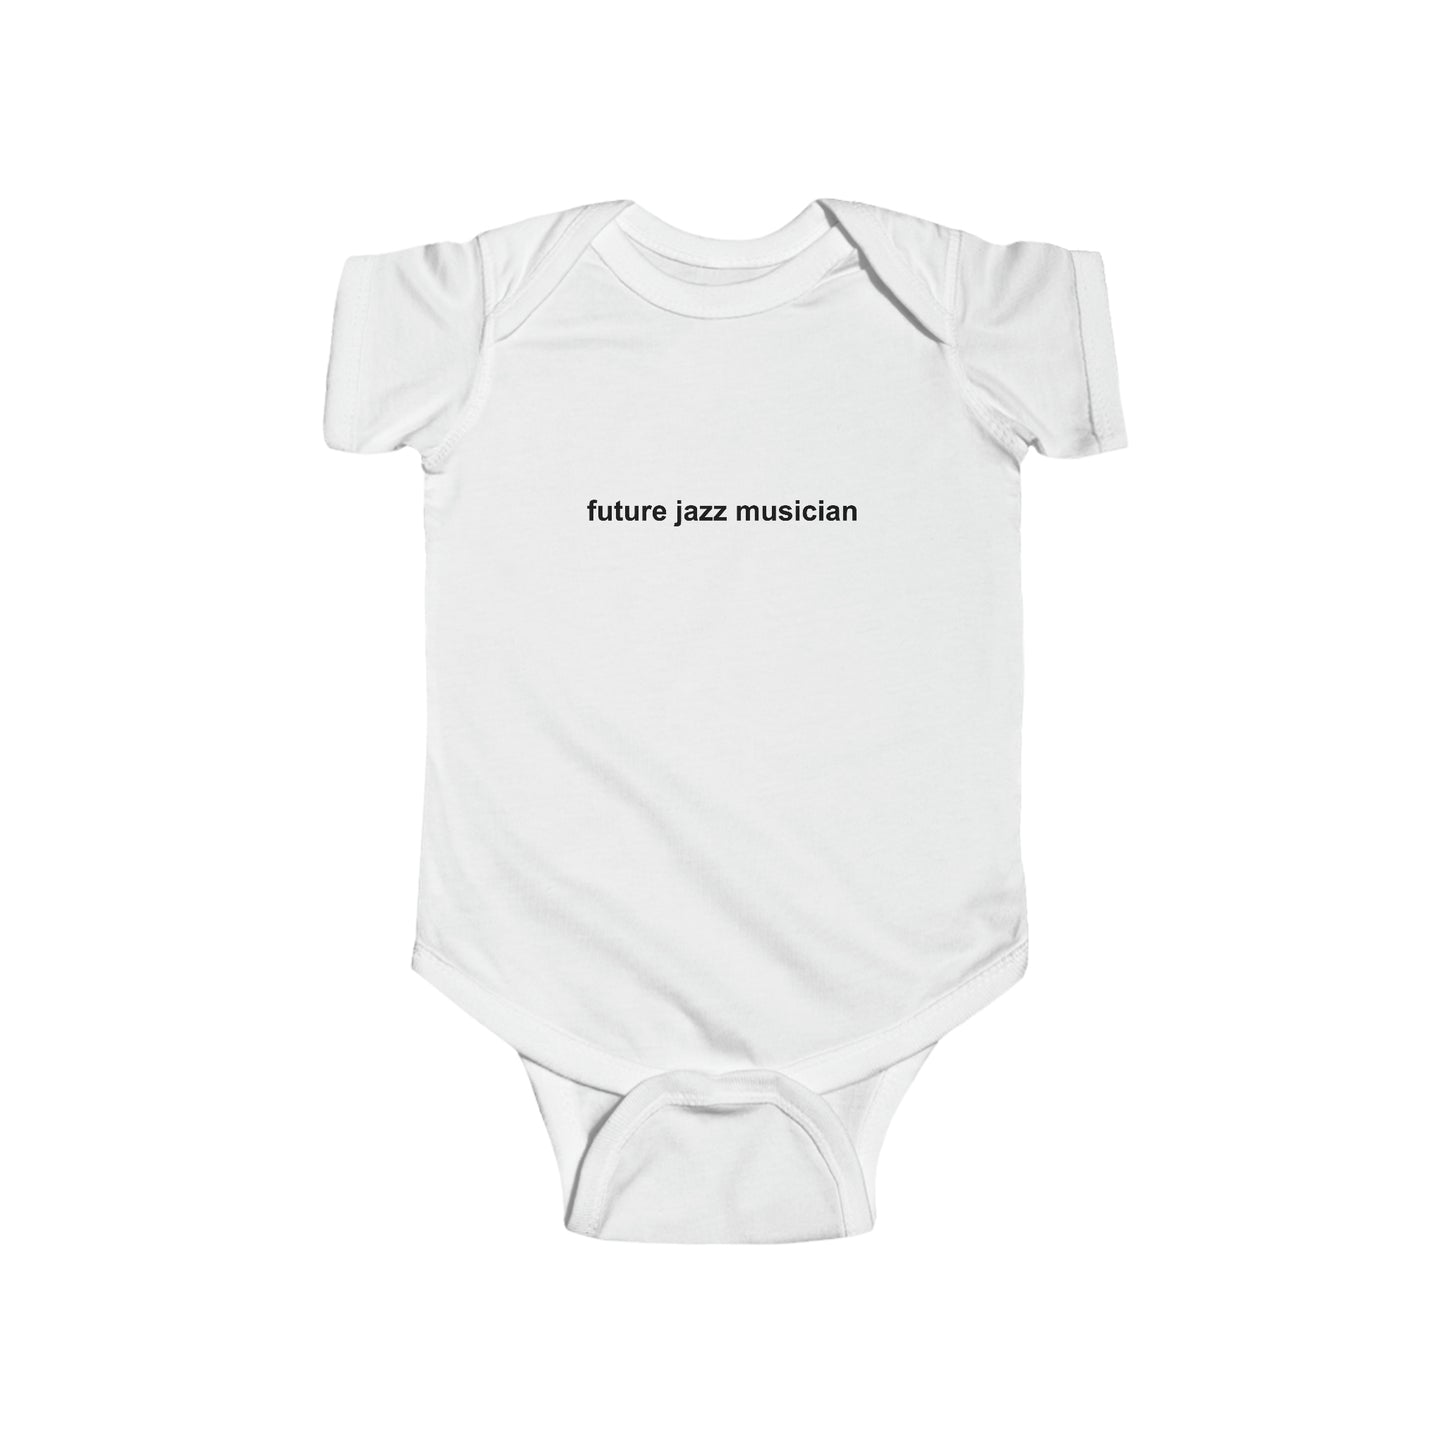 Future Jazz Musician Baby Onesie | Musical Family Infant Wear | Baby Announcement & Jazz Fan Gifts